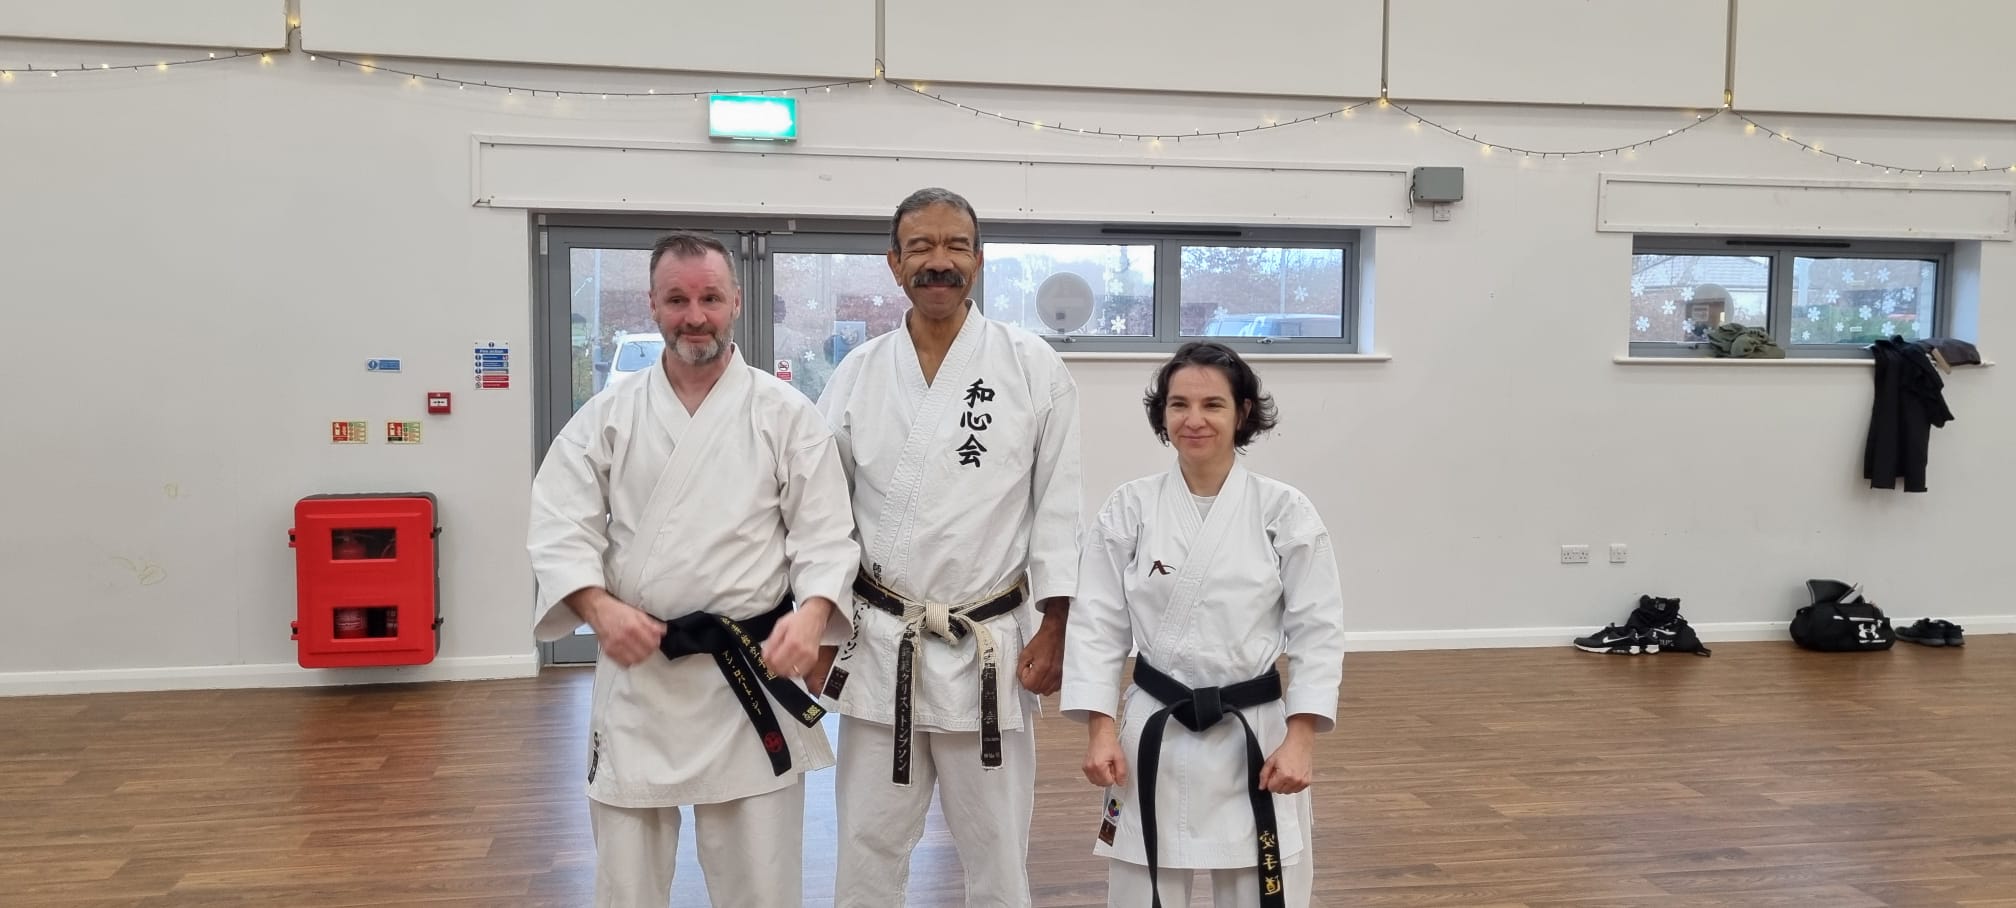 Ana-Maria Apostol and Ian Gee after their Shodan Grading with Shihan Thompson